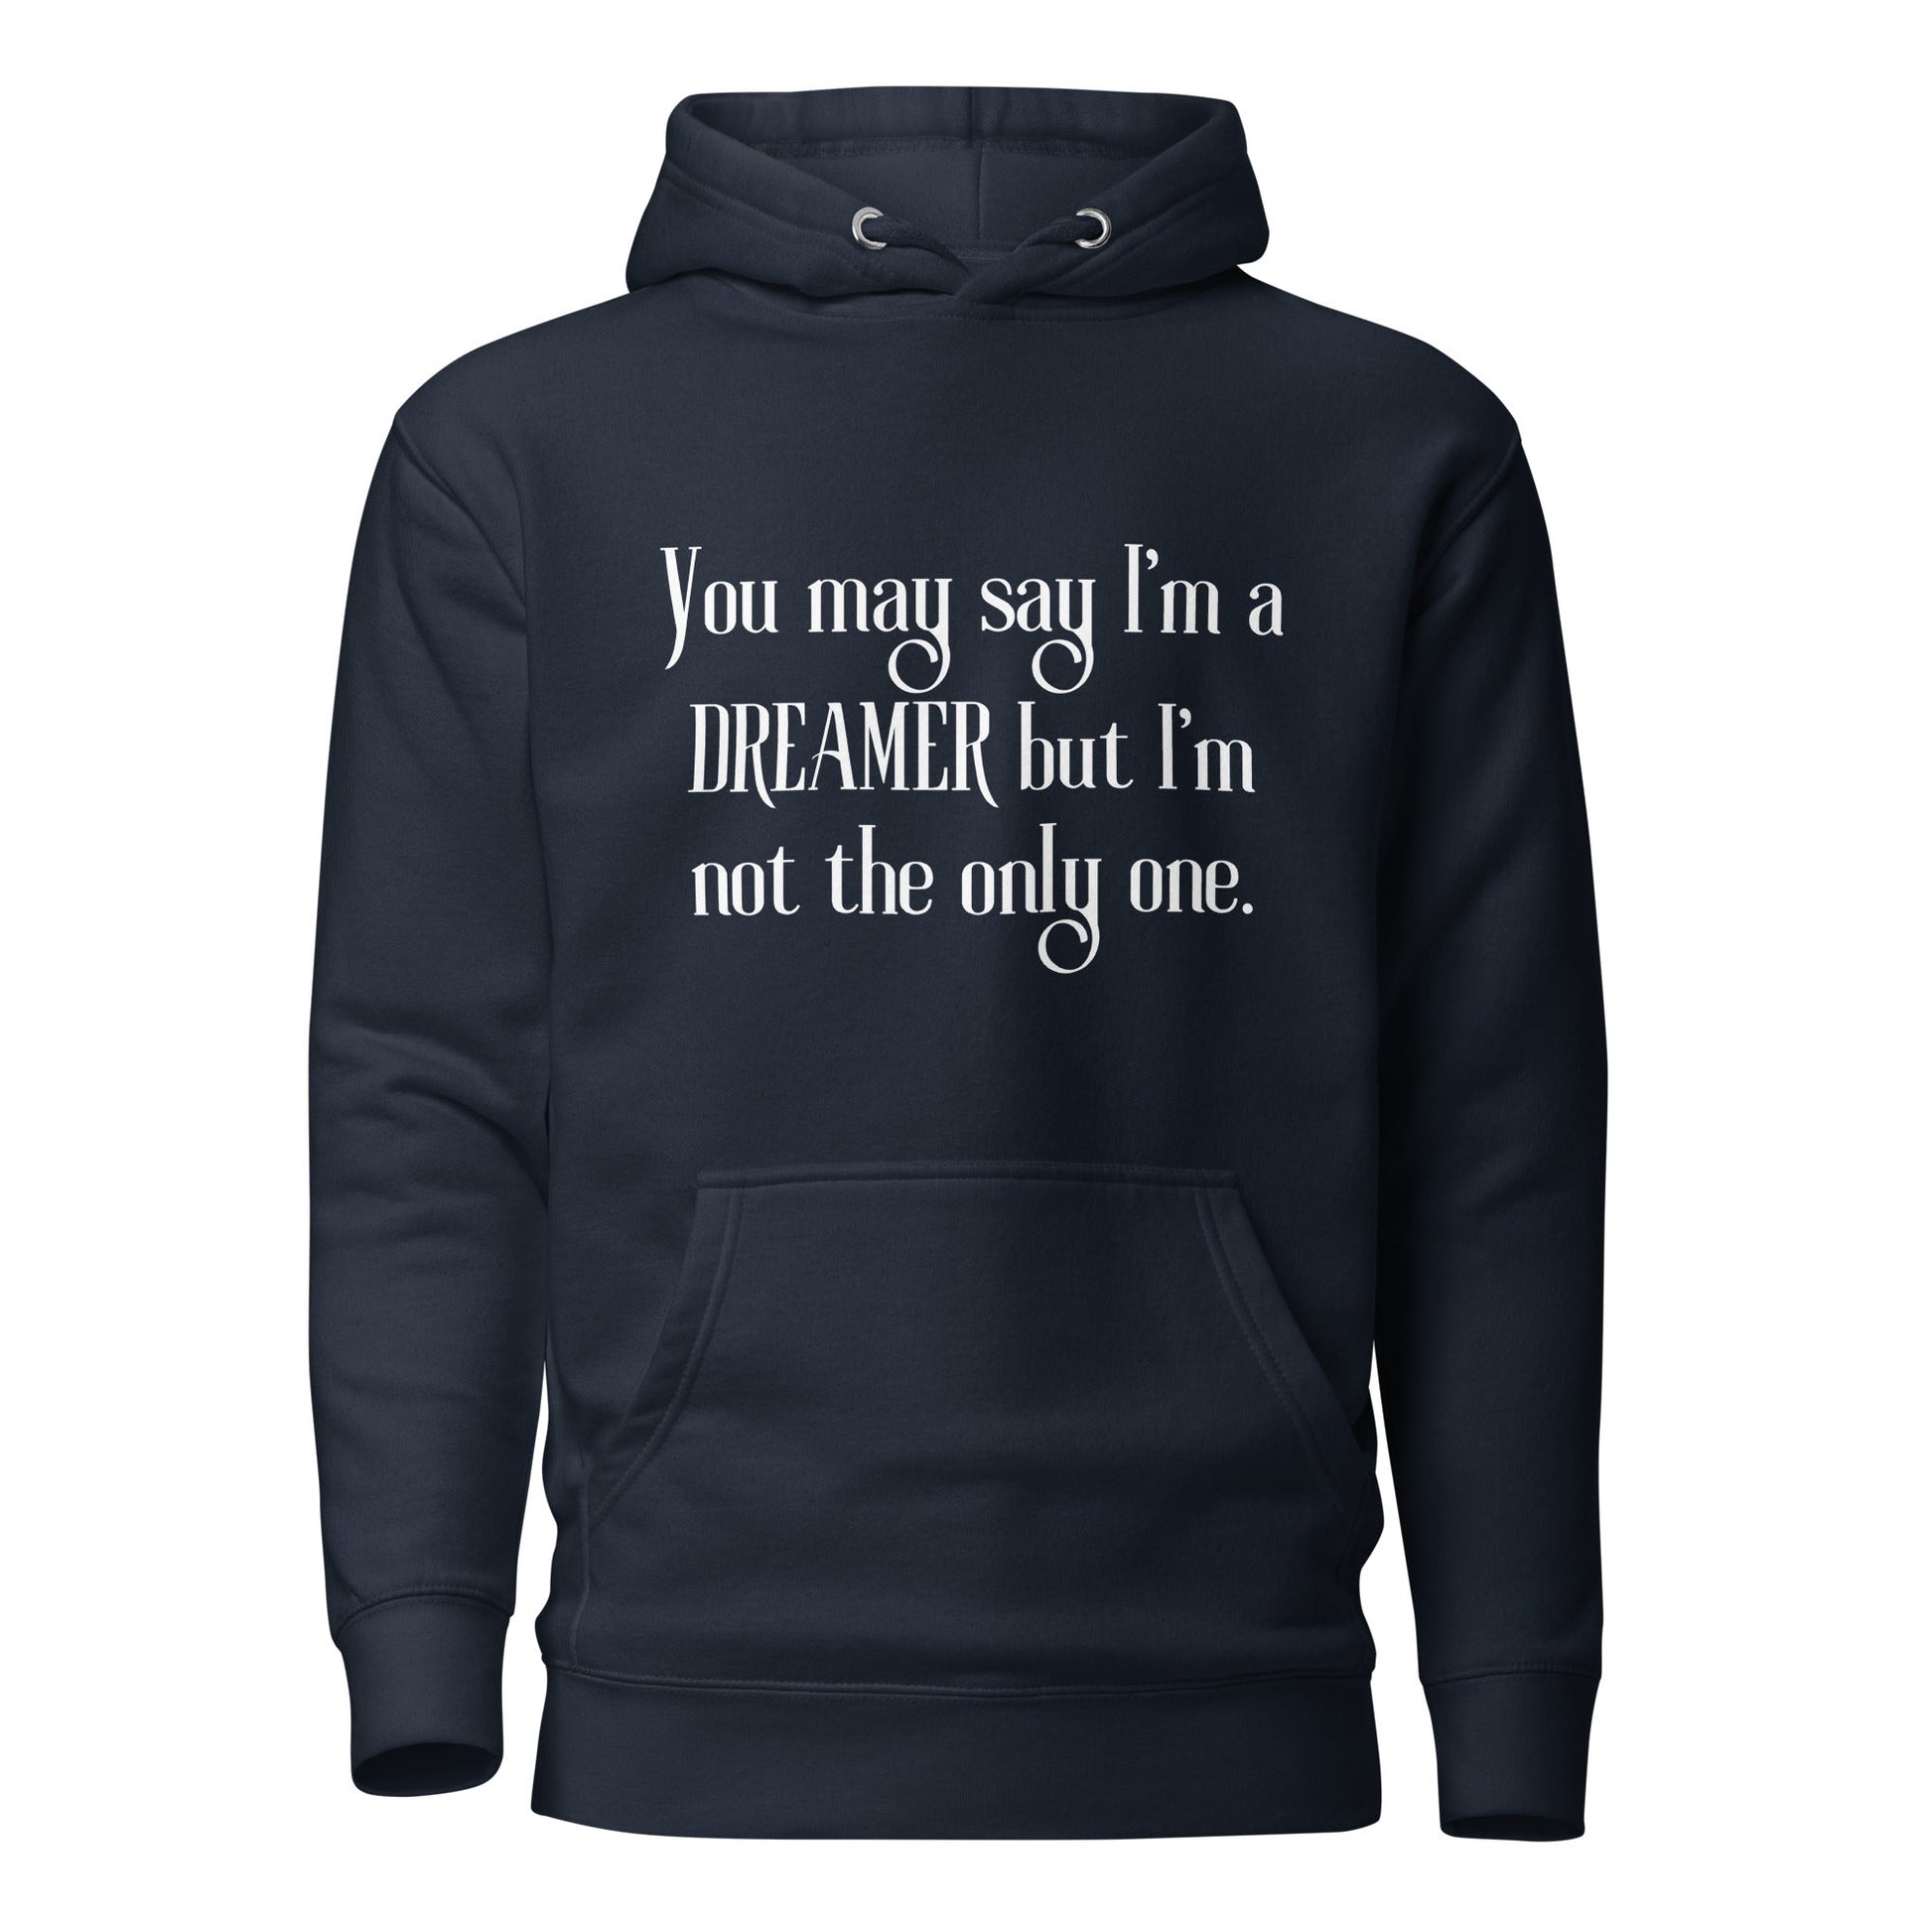 Dreamer Graphic Unisex Hoodie | Fun Graphic Hooded